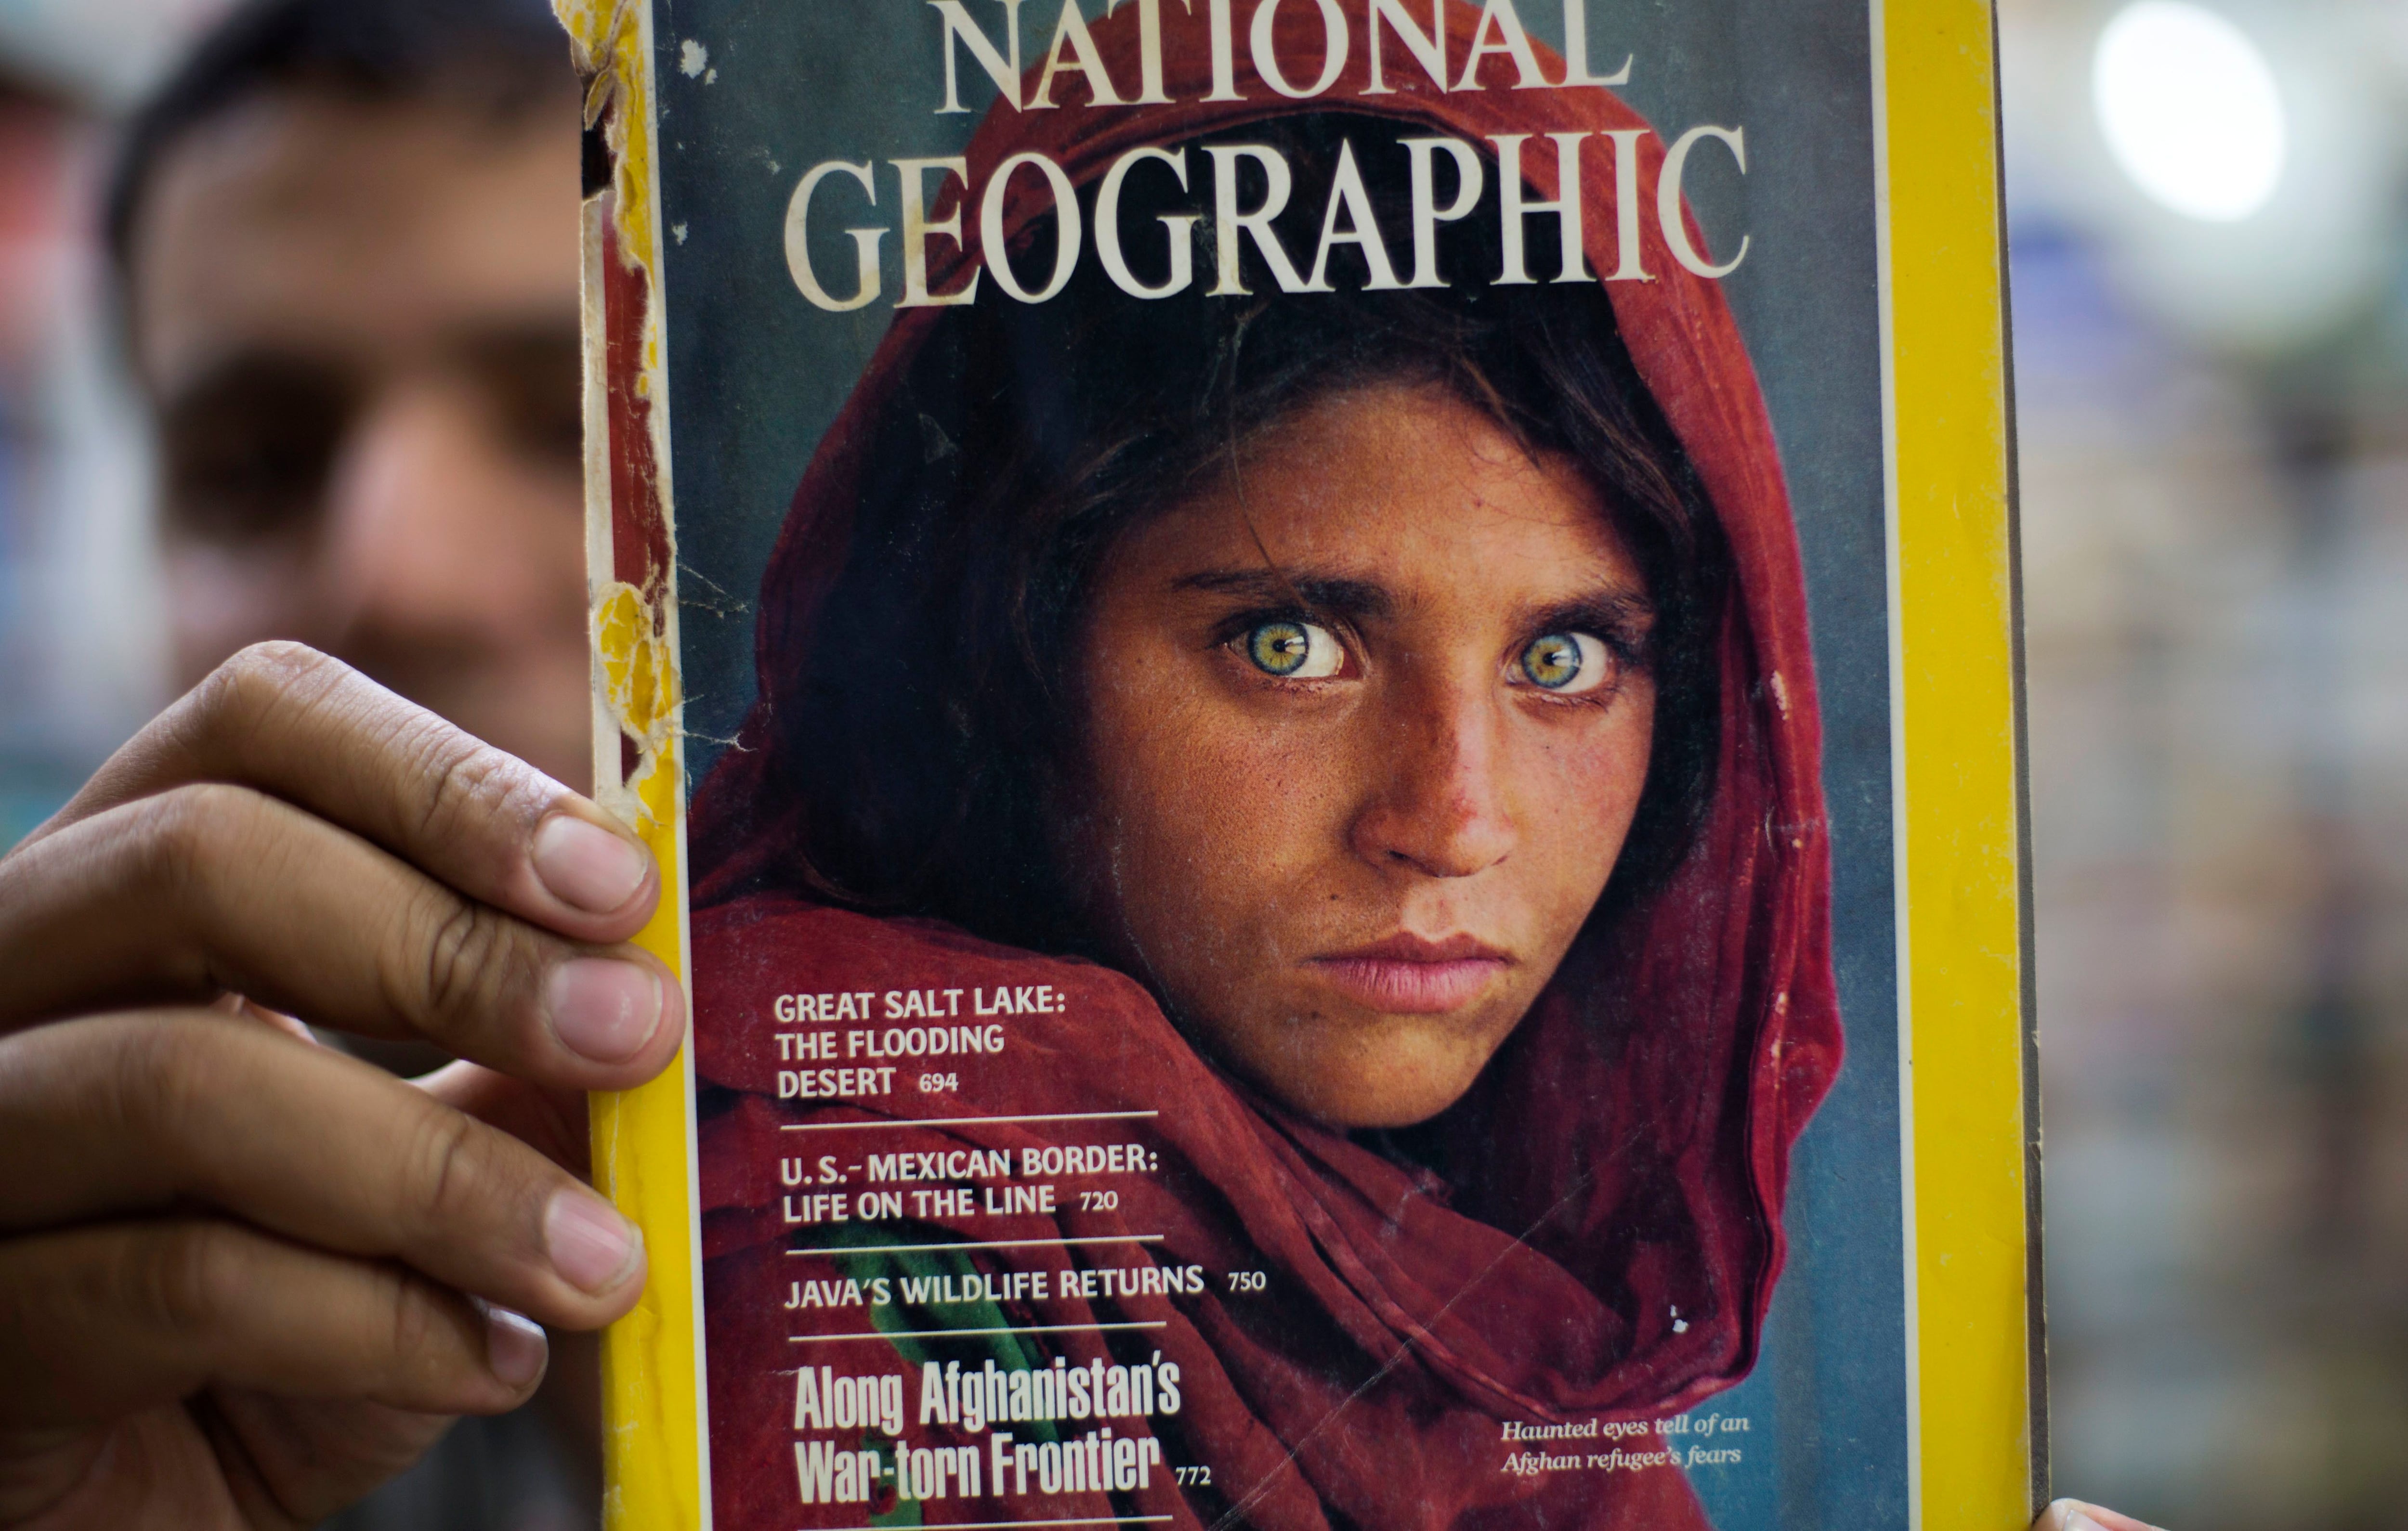 End of an Era: The Real Reason Why National Geographic Is Shutting